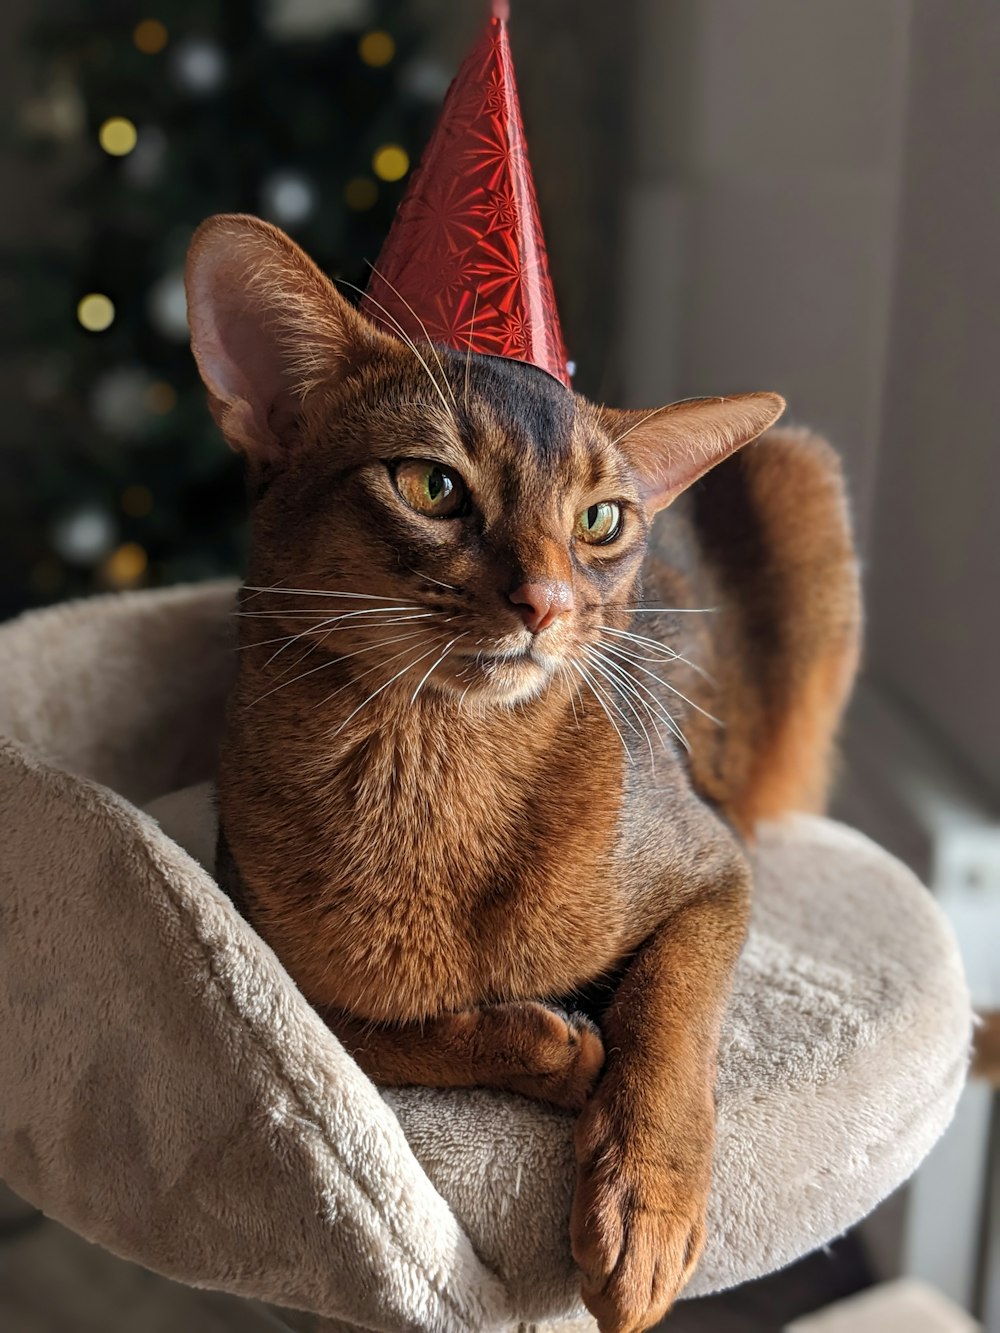 a cat wearing a red party hat sitting on a chair